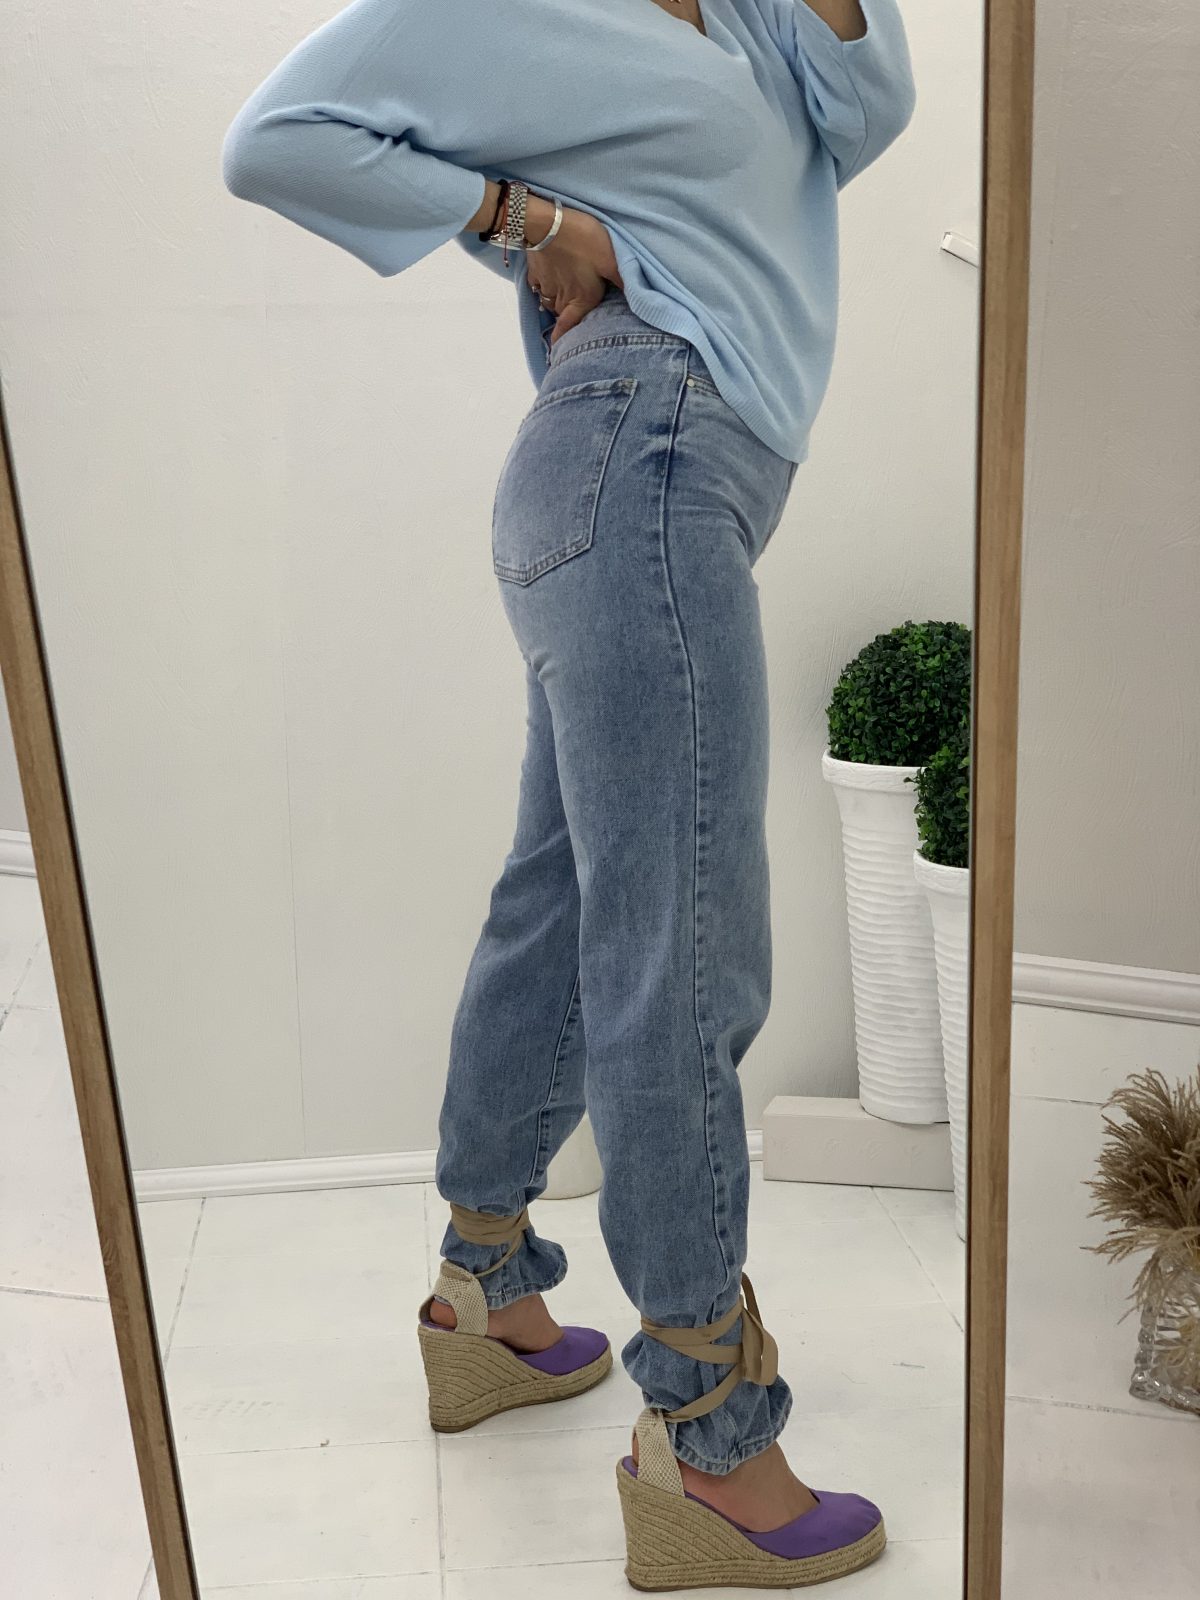 High-waisted light-colored jeans